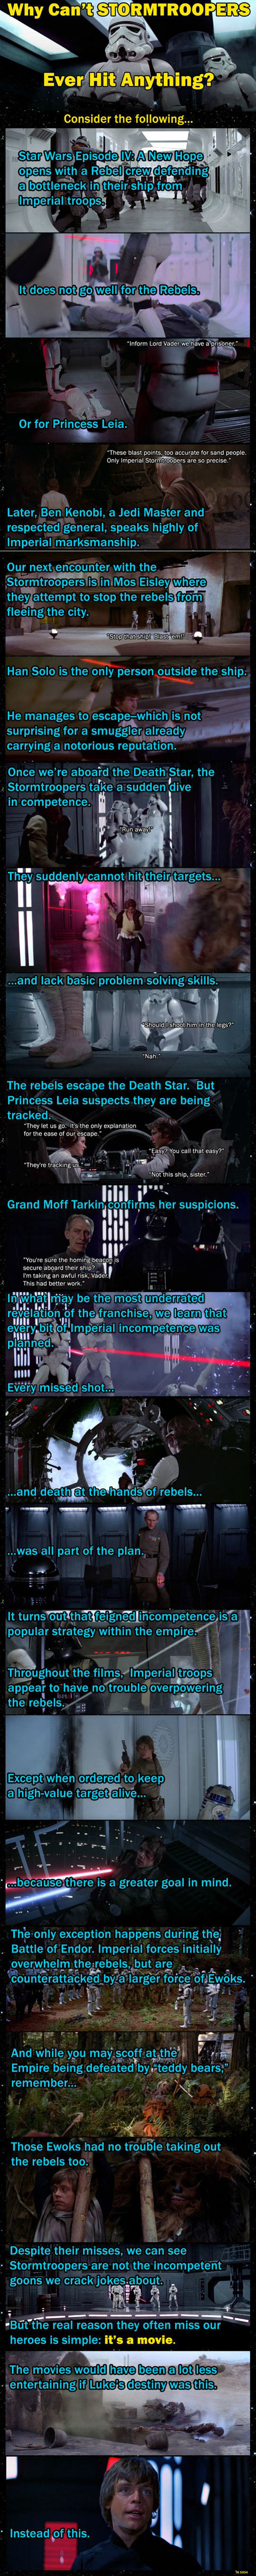 cool-Stormtroopers-why-miss-hit